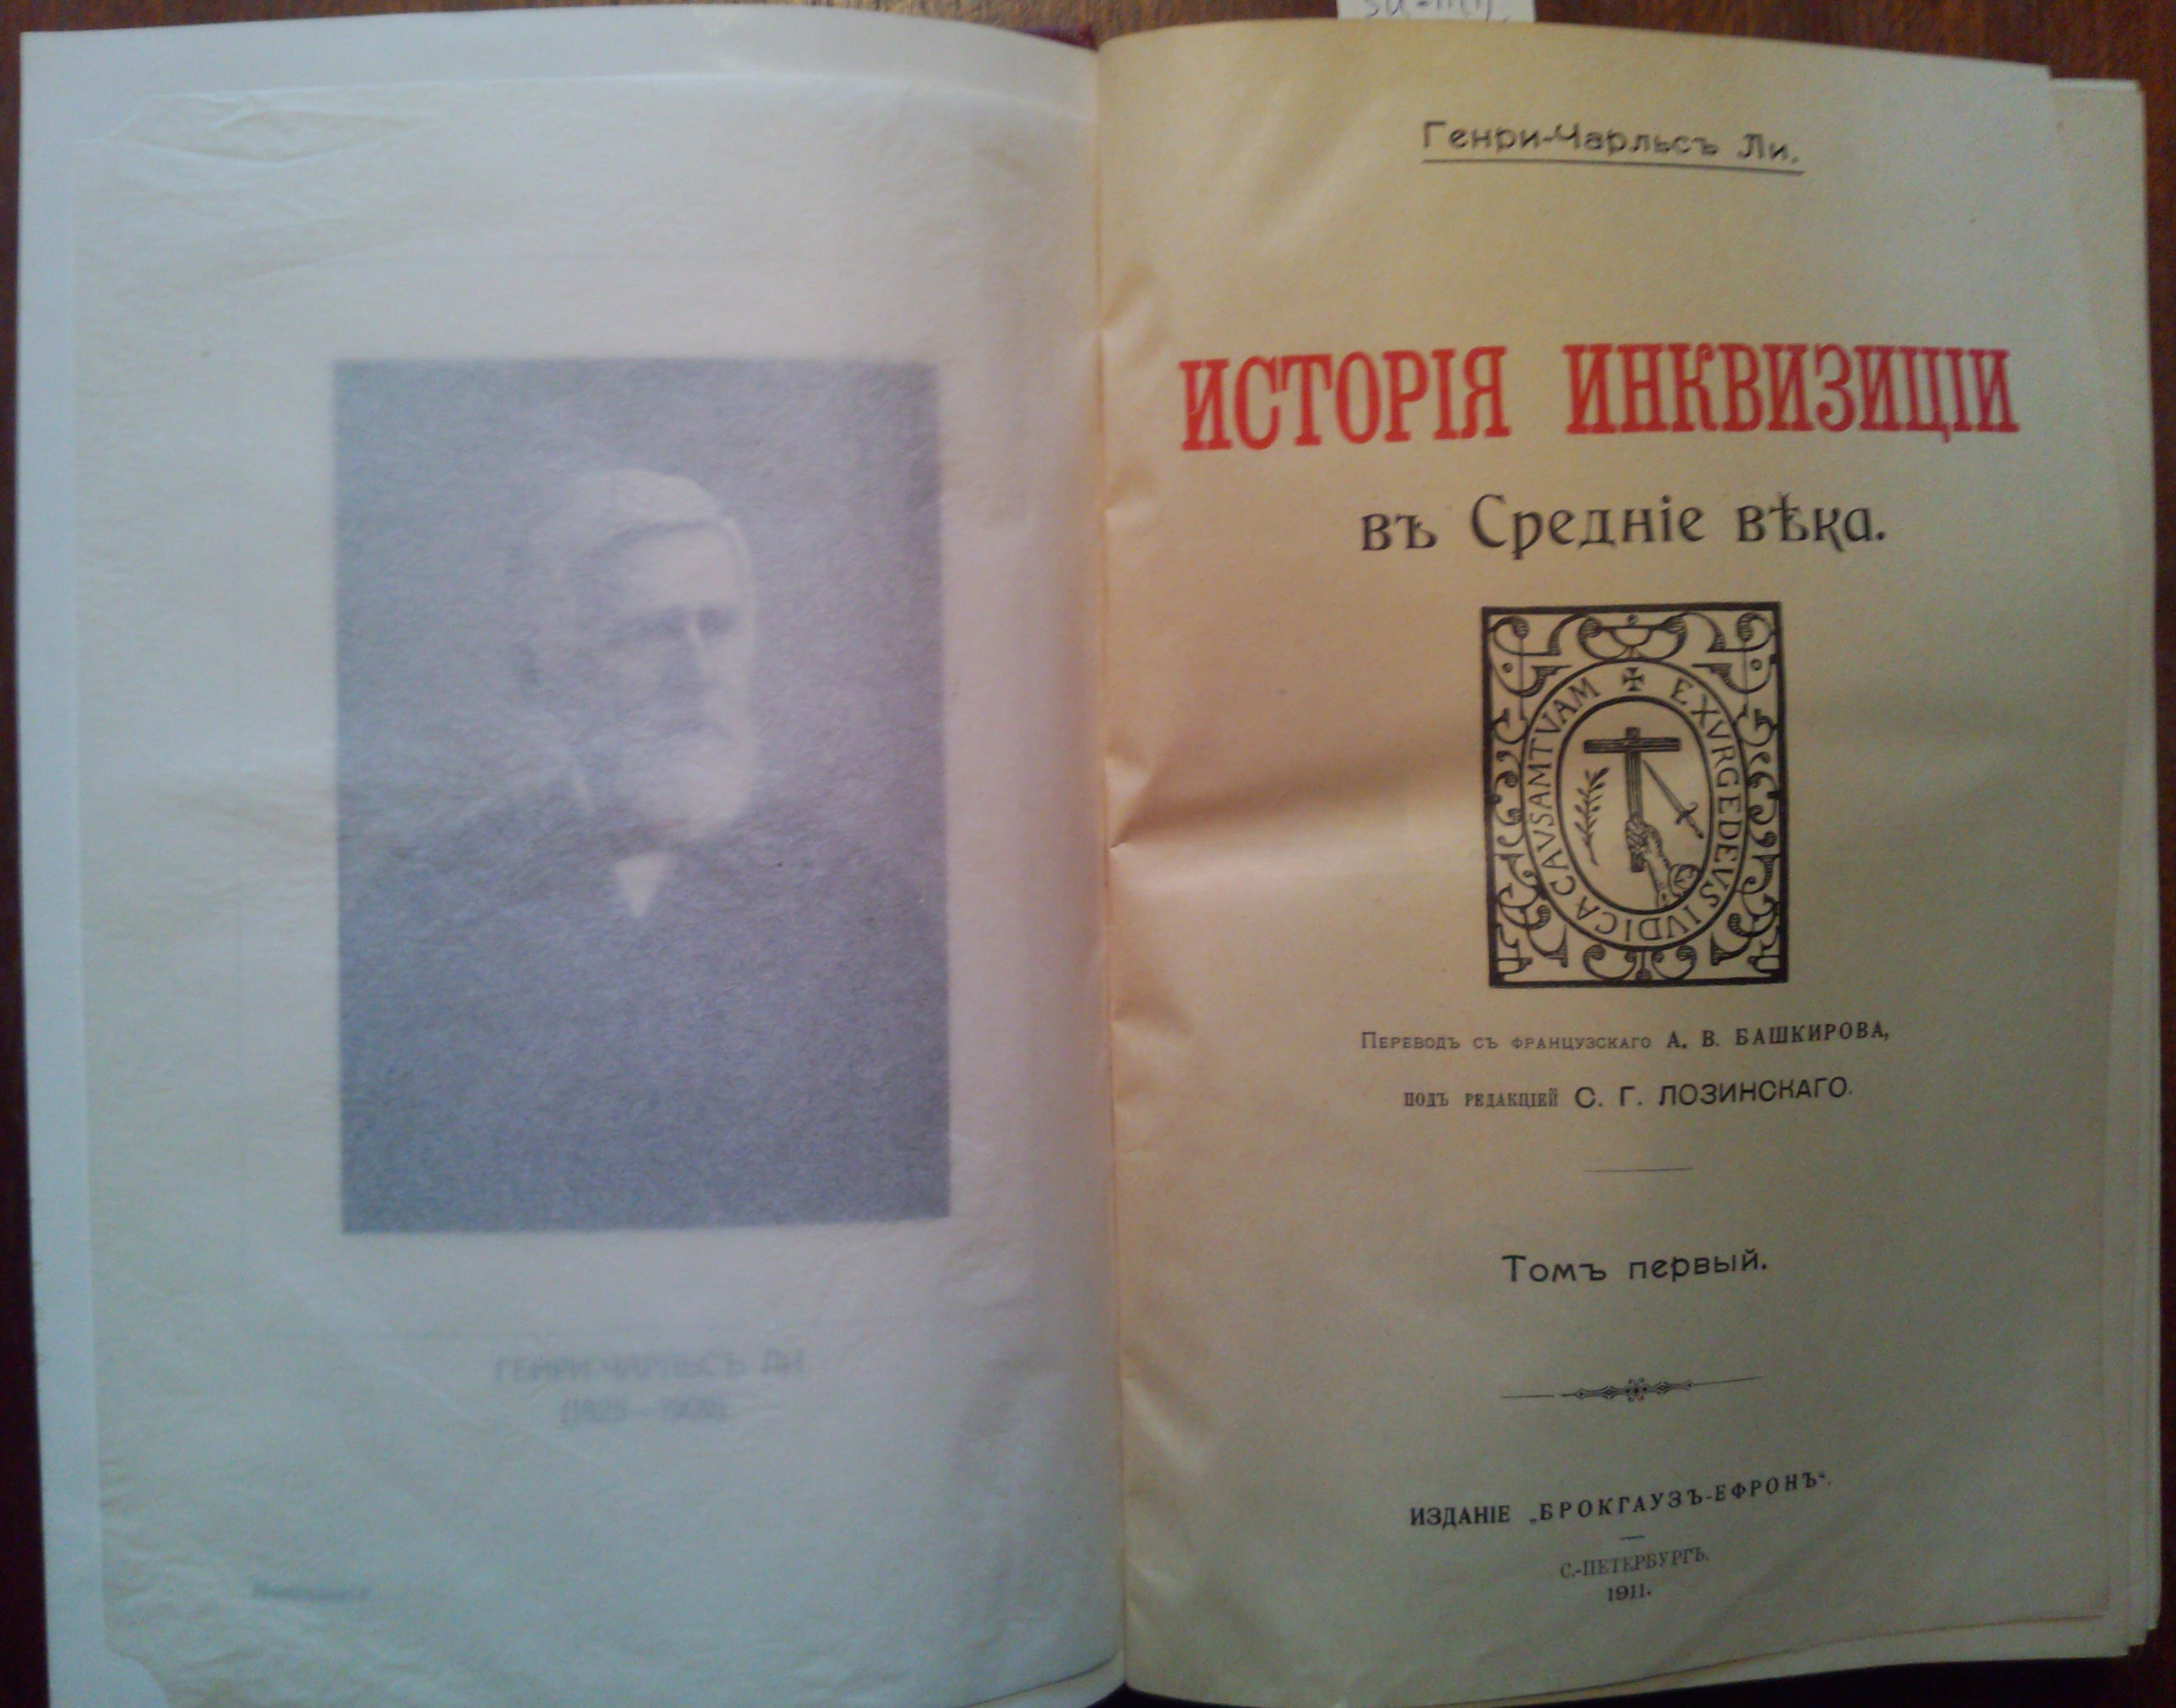 Krymskiy A. Istoriya Persii, ee literatury i dervisheskoy teosofii. T. I. # 2/Crimean A. History of Persia, its Literature and Dervish Theosophy. Vol.I. # 2 In Russian (ask us if in doubt) - landofmagazines.com